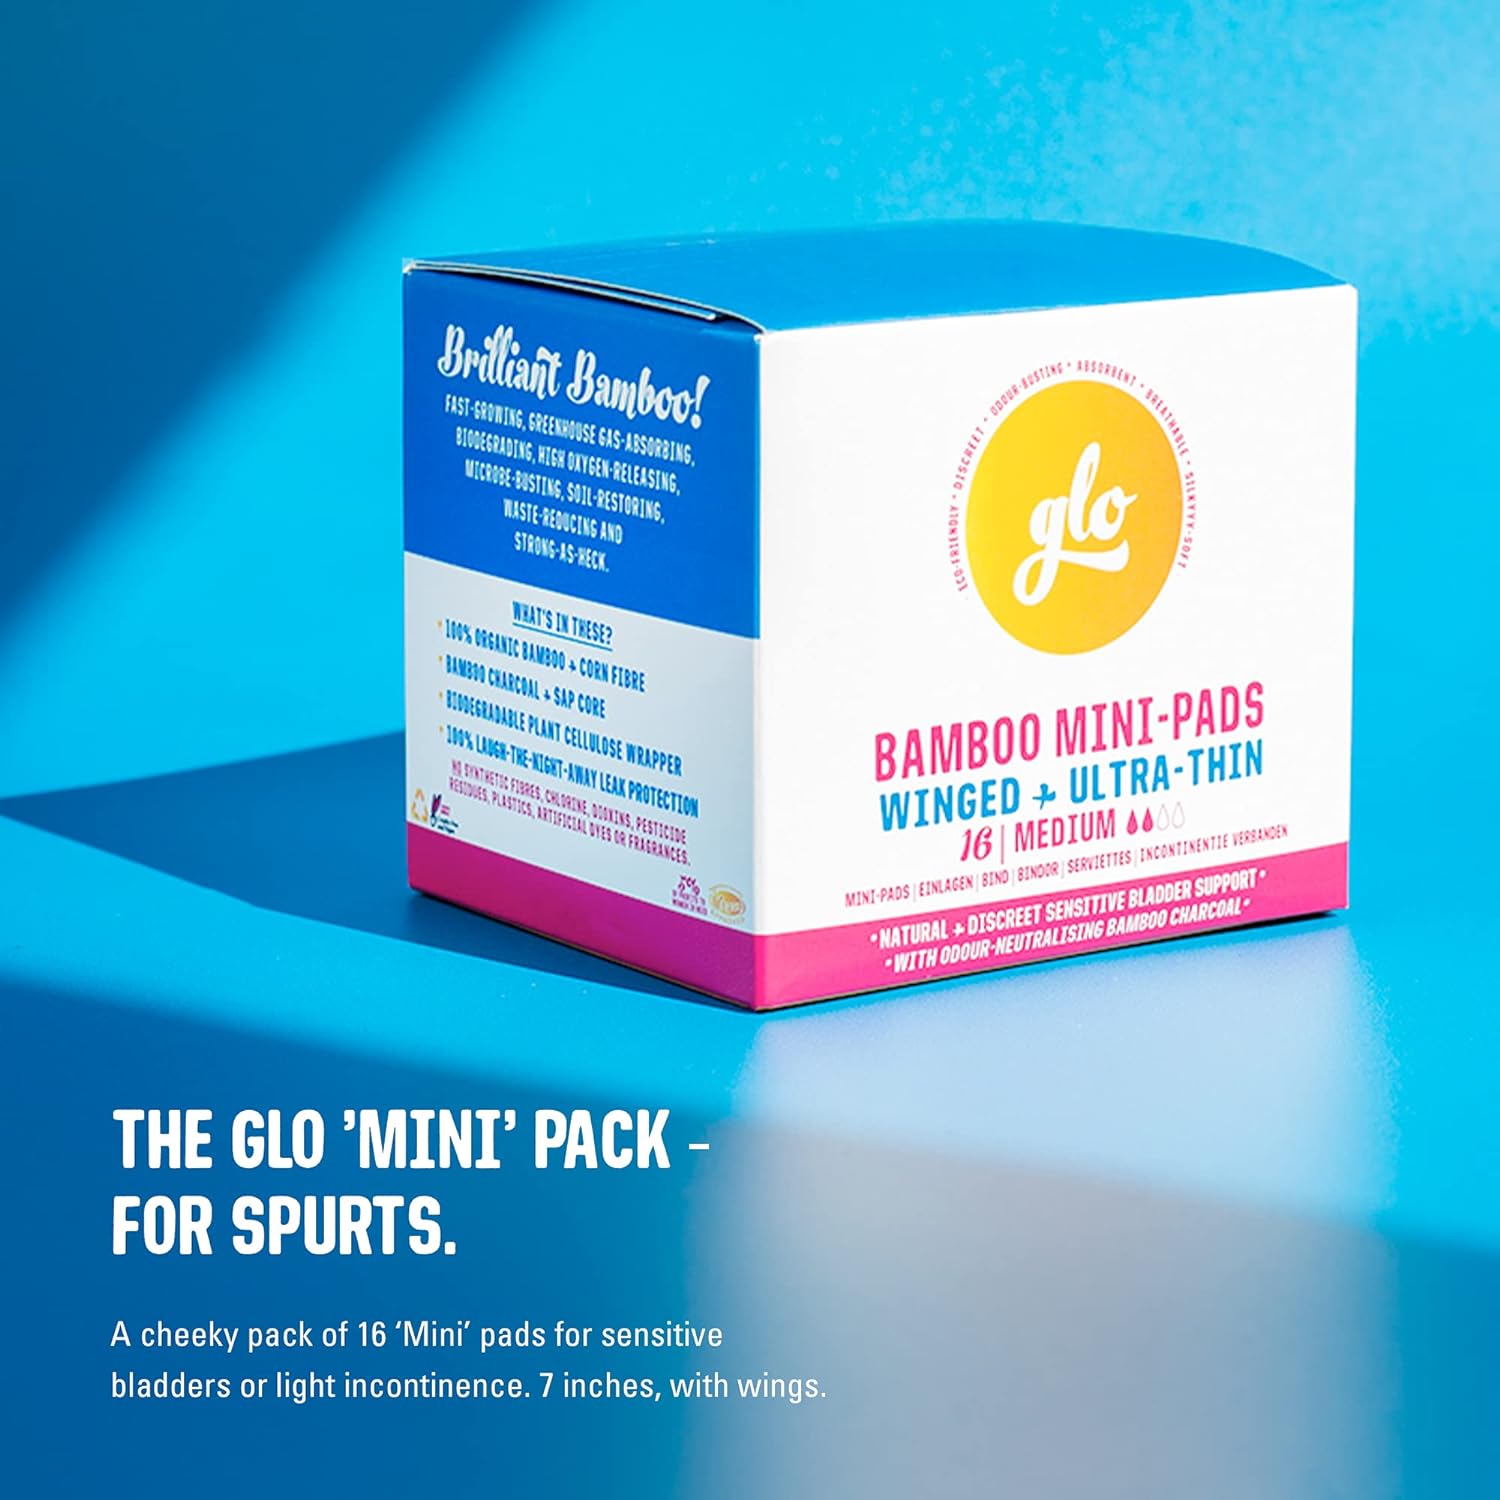 Glo Bamboo Mini-Pads for Sensitive Bladder (16 pads)